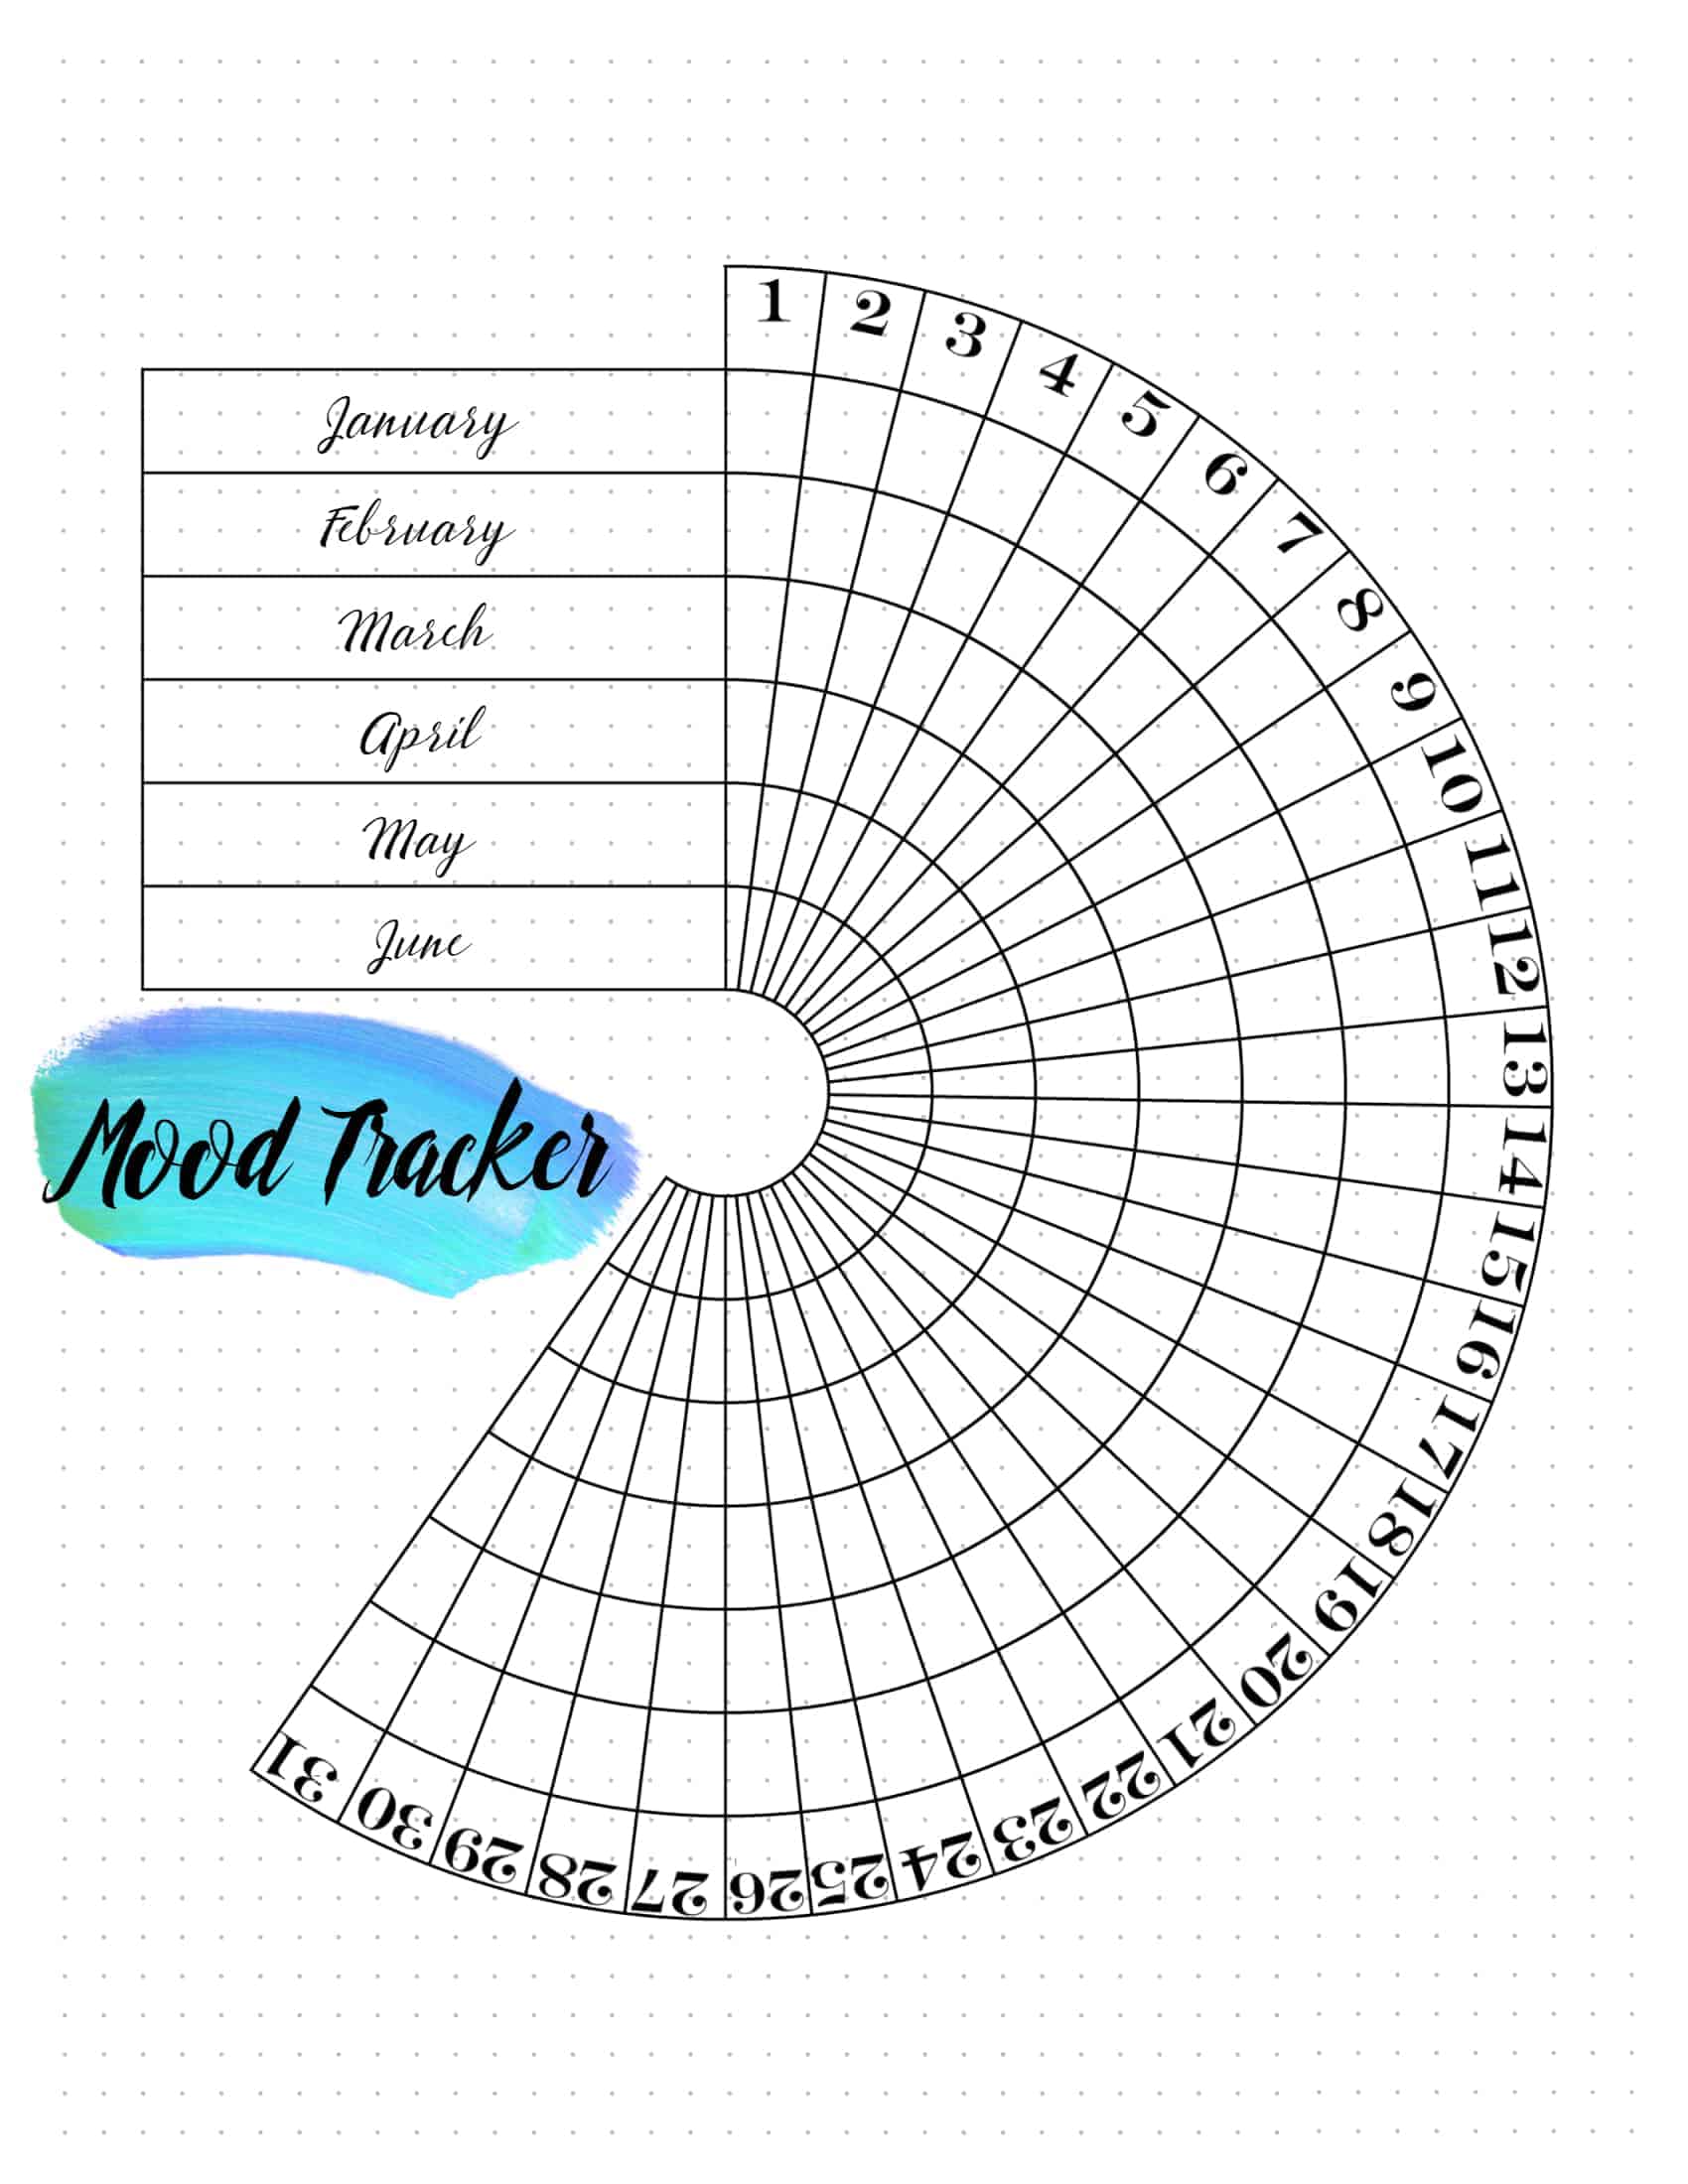 free-printable-mood-tracker-bullet-journal-classic-style-20-templates